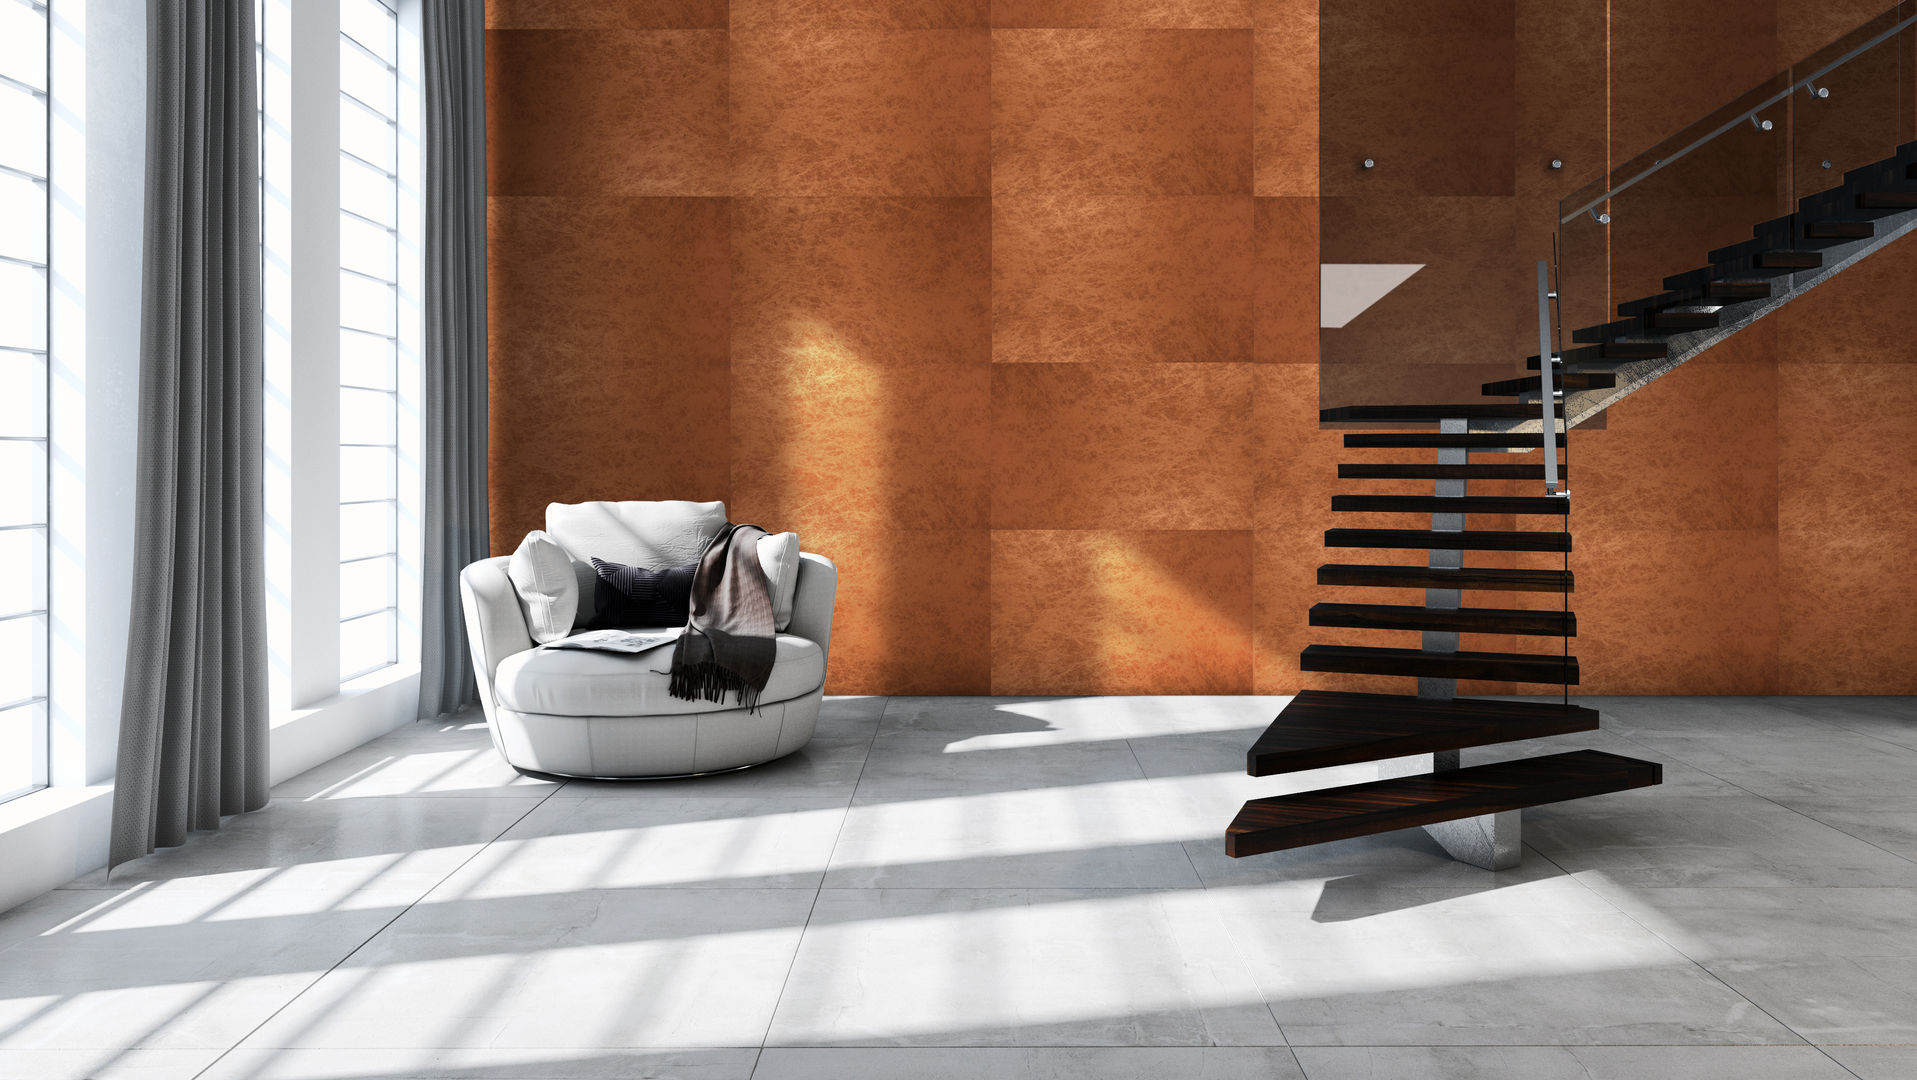 Metalegance Collection, Muratto | Cork Wall Design Muratto | Cork Wall Design Salones modernos